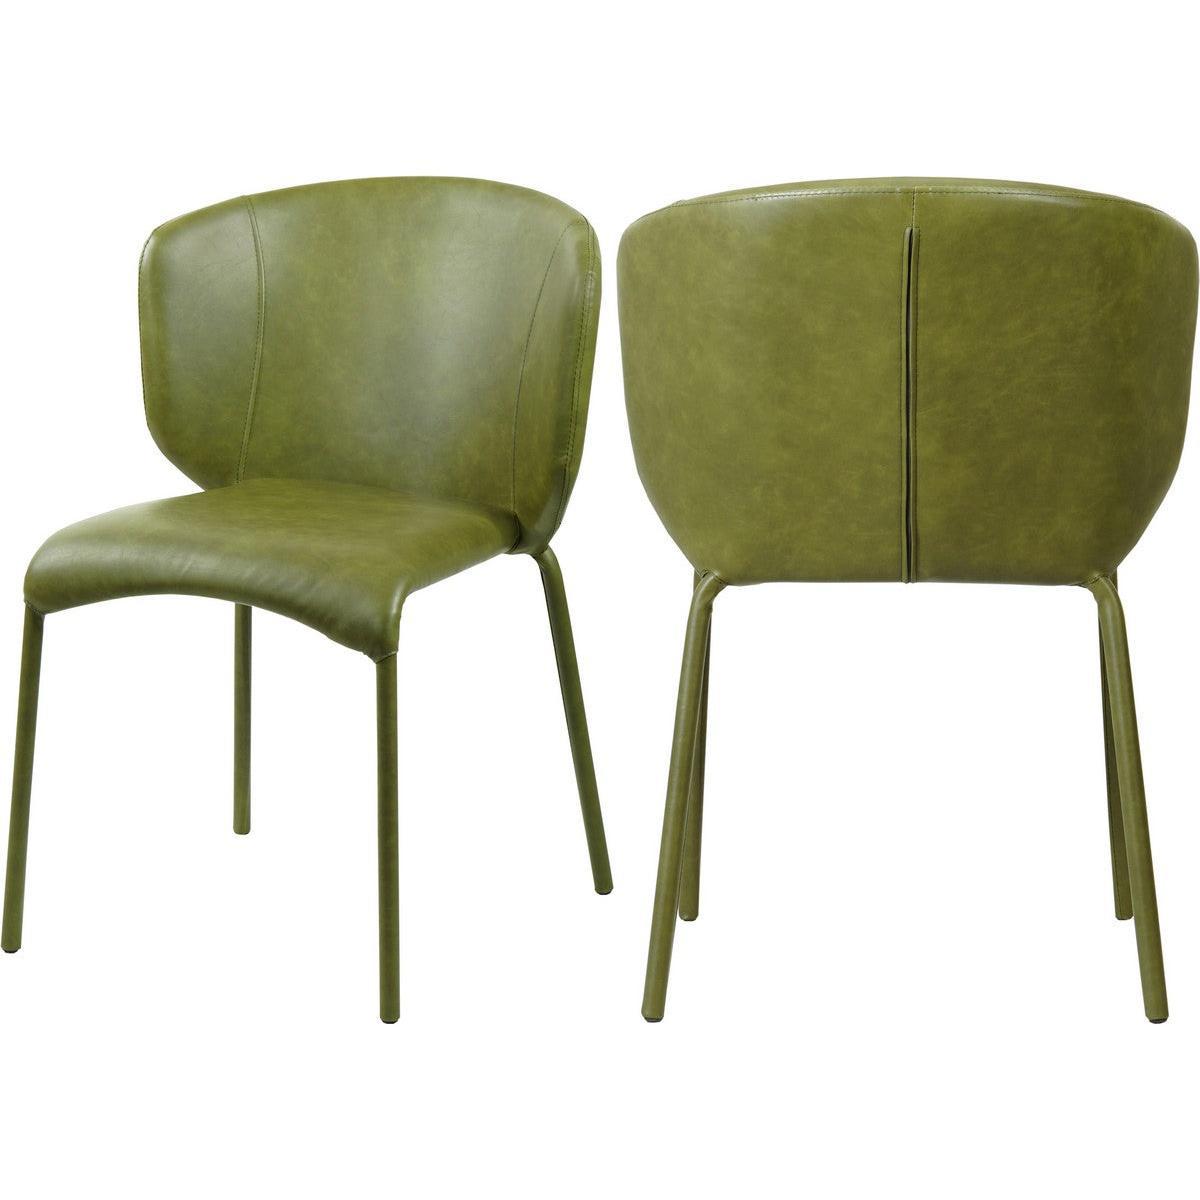 Meridian Furniture Drew Olive Green Faux Leather Dining ChairMeridian Furniture - Dining Chair - Minimal And Modern - 1